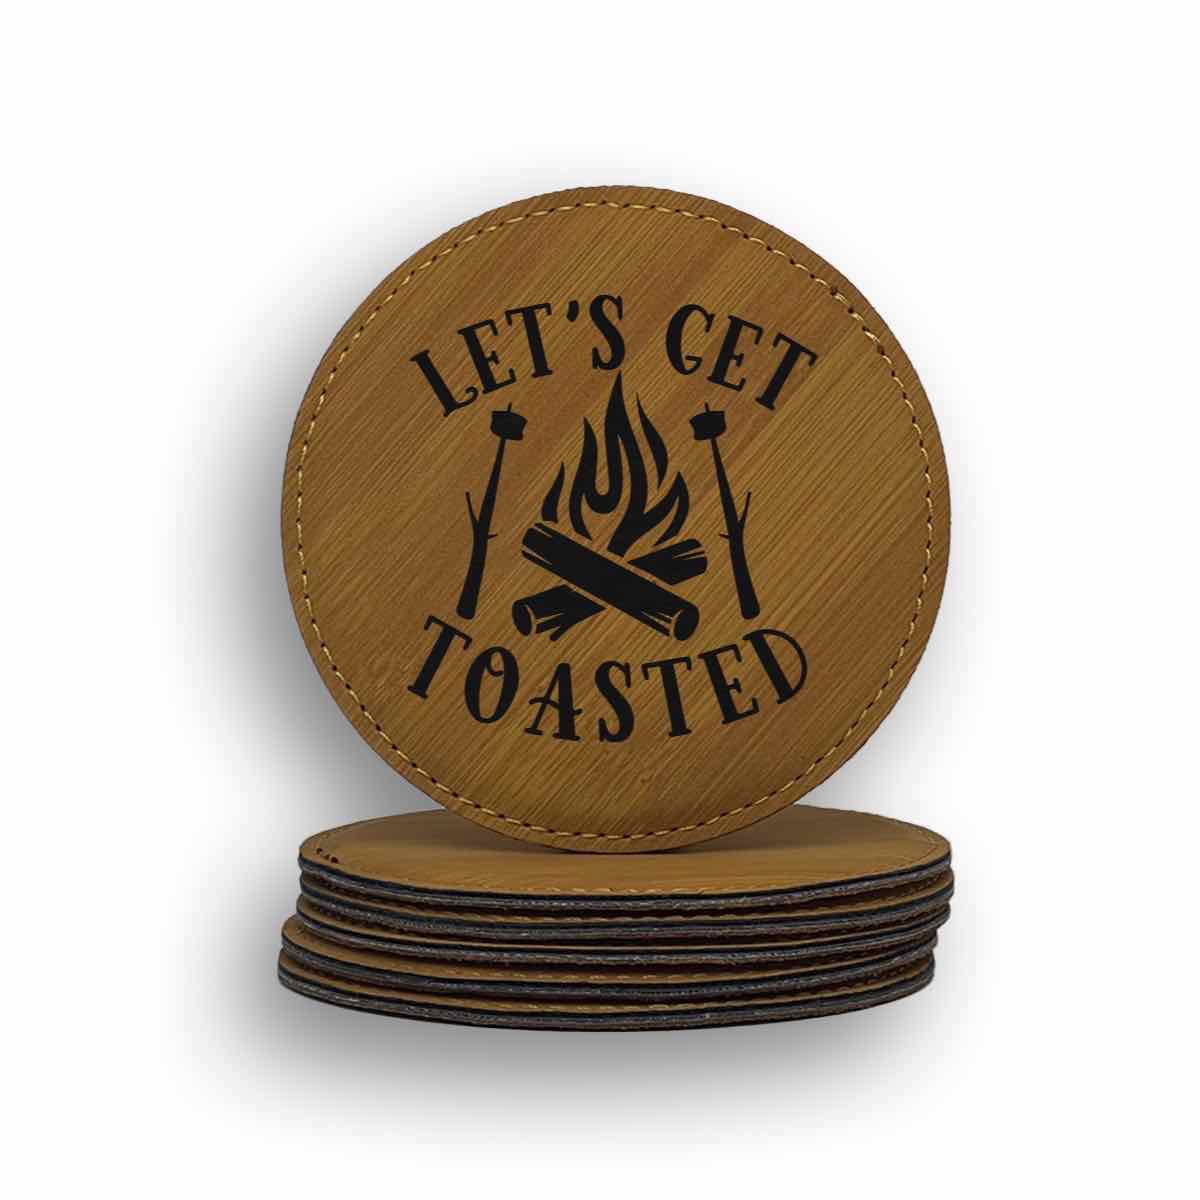 Let's Get Toasted Coaster